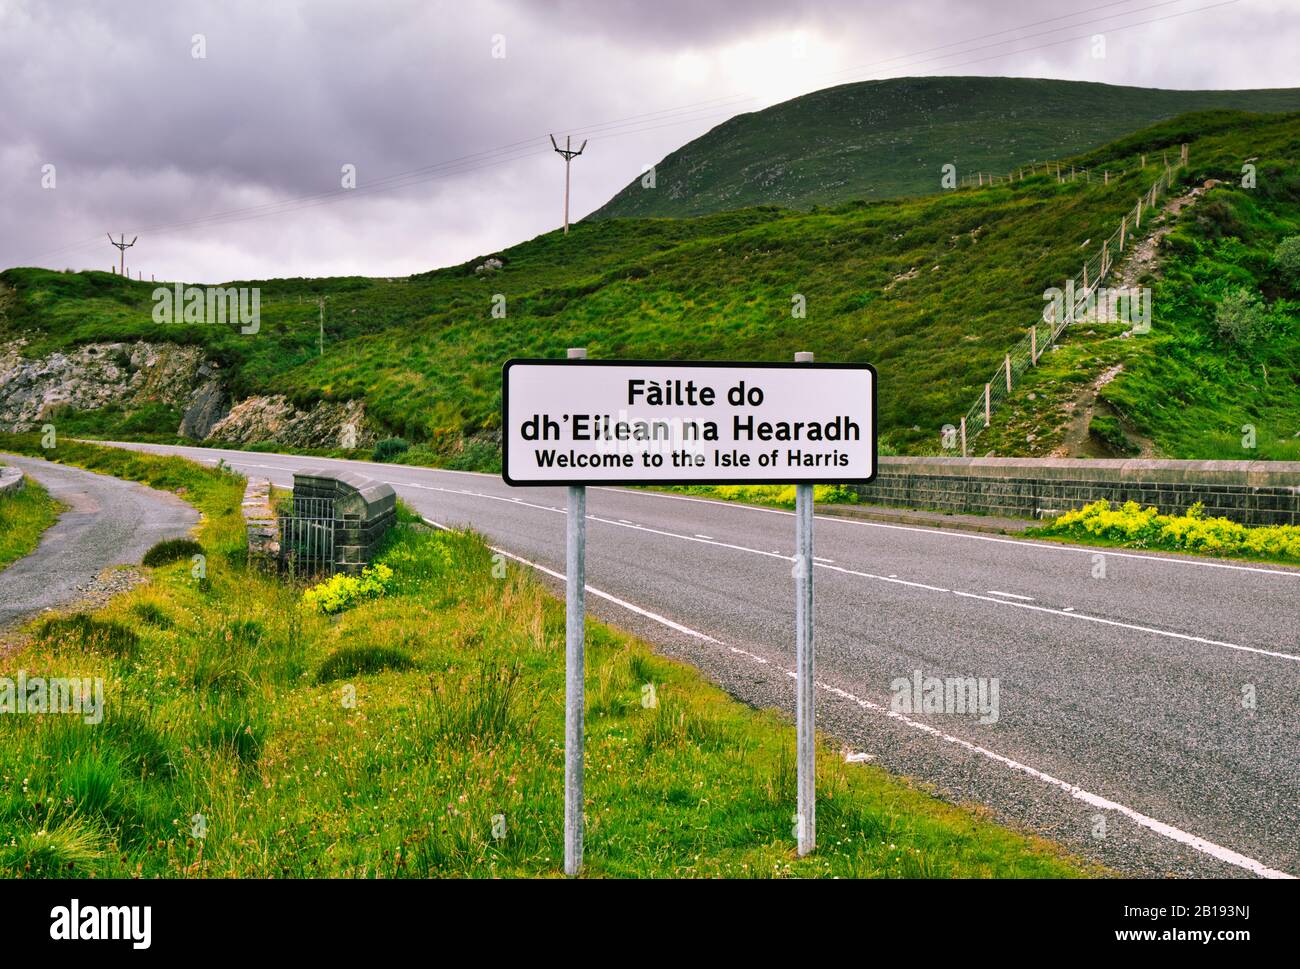 Welcome to Isle of Harris sign, Isle of Lewis and Harris, Outer Hebrides, Scotland Stock Photo